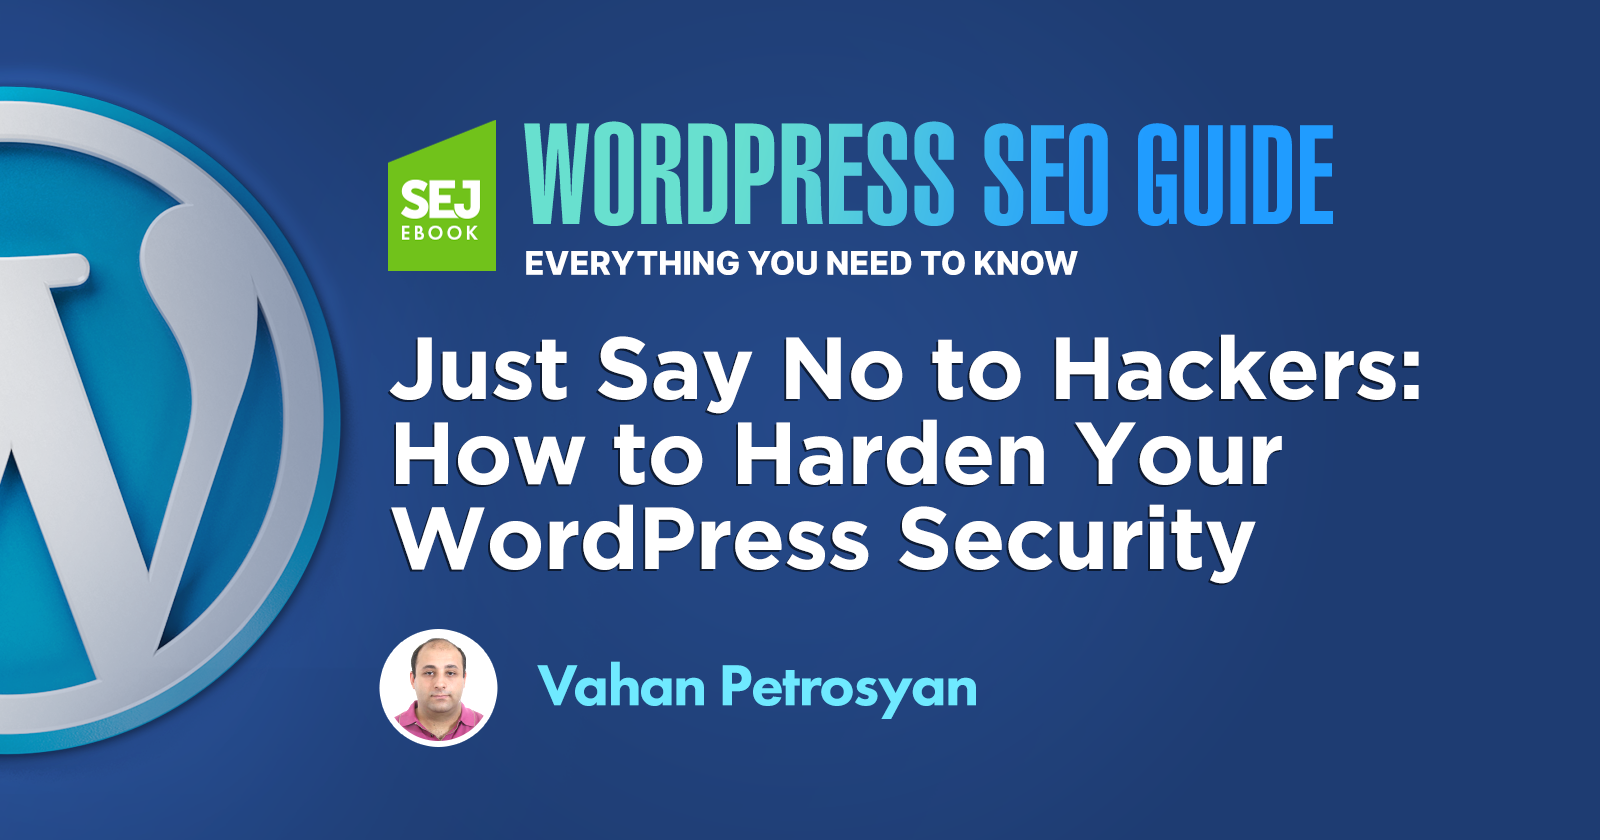 How to Harden Your WordPress Security